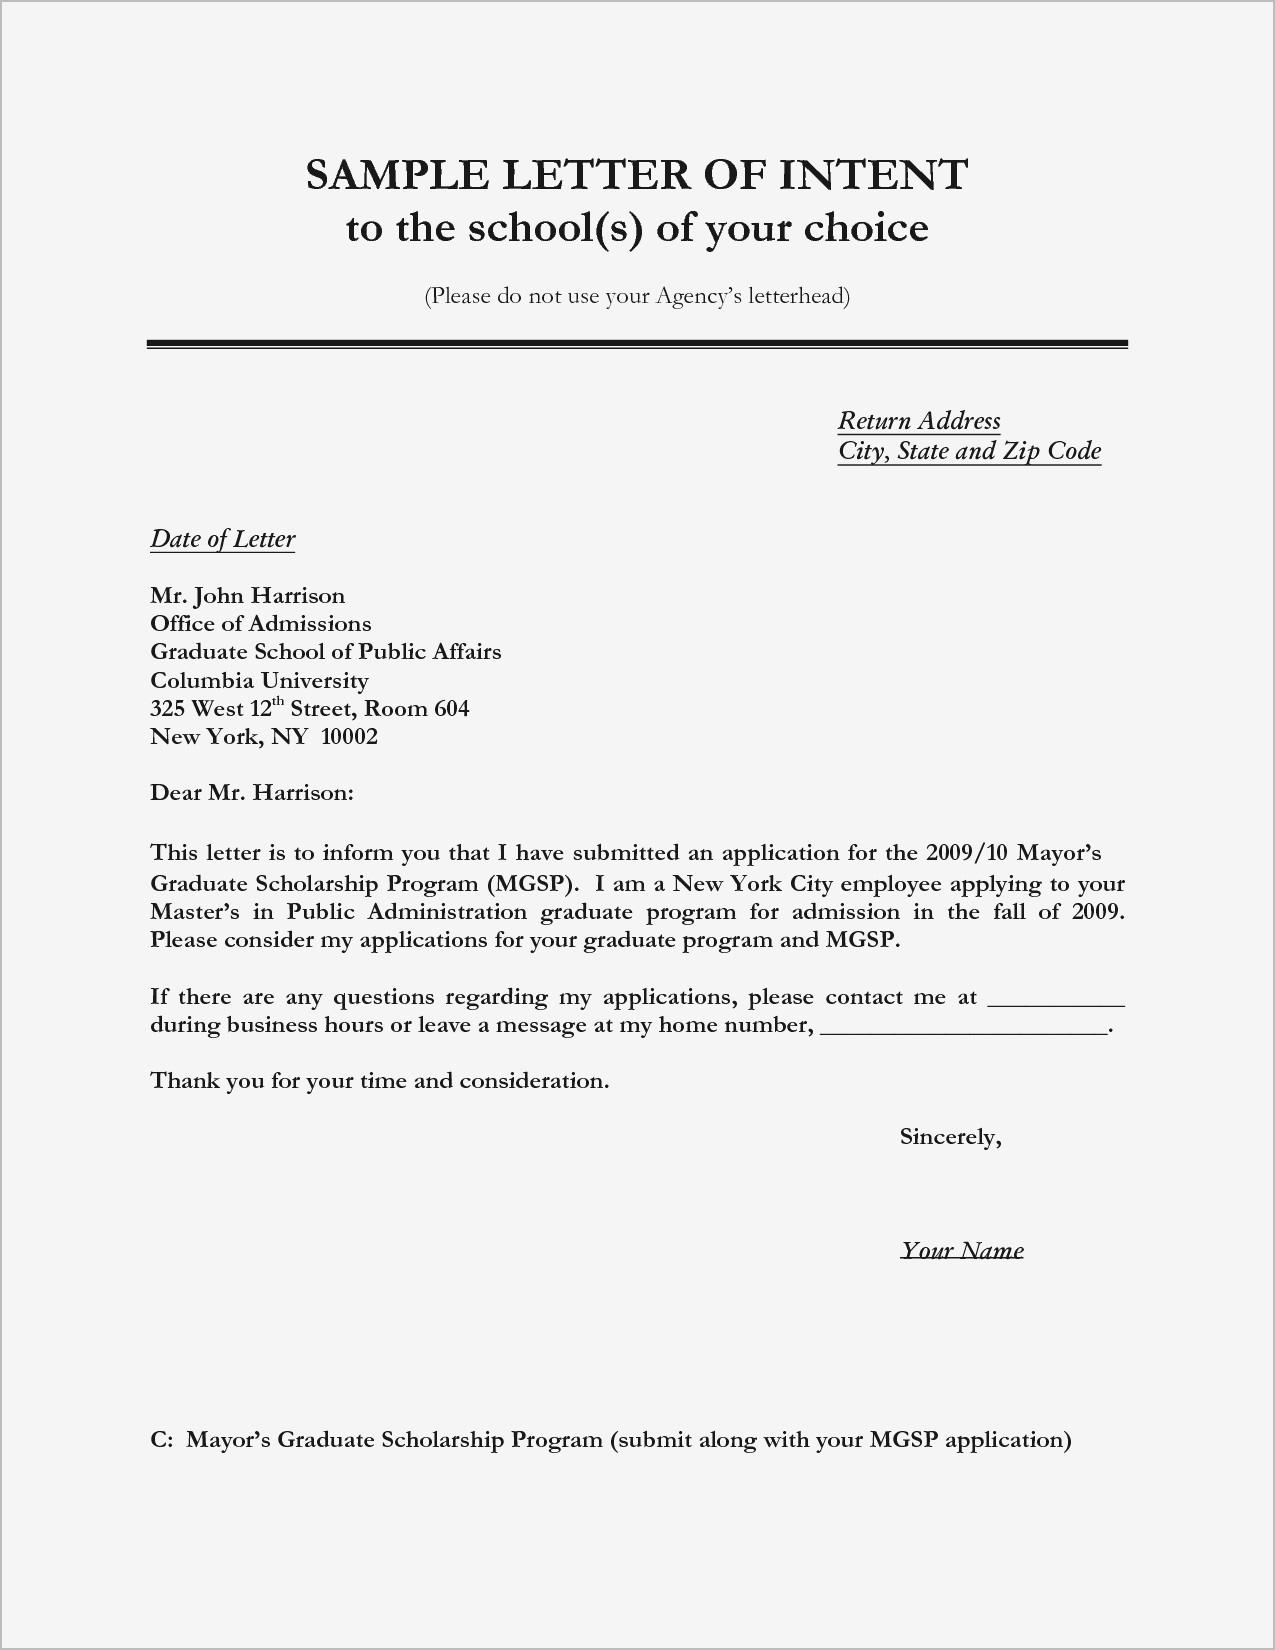 Letter Of Confidentiality and Nondisclosure Template - Standard Confidentiality Agreement Samples